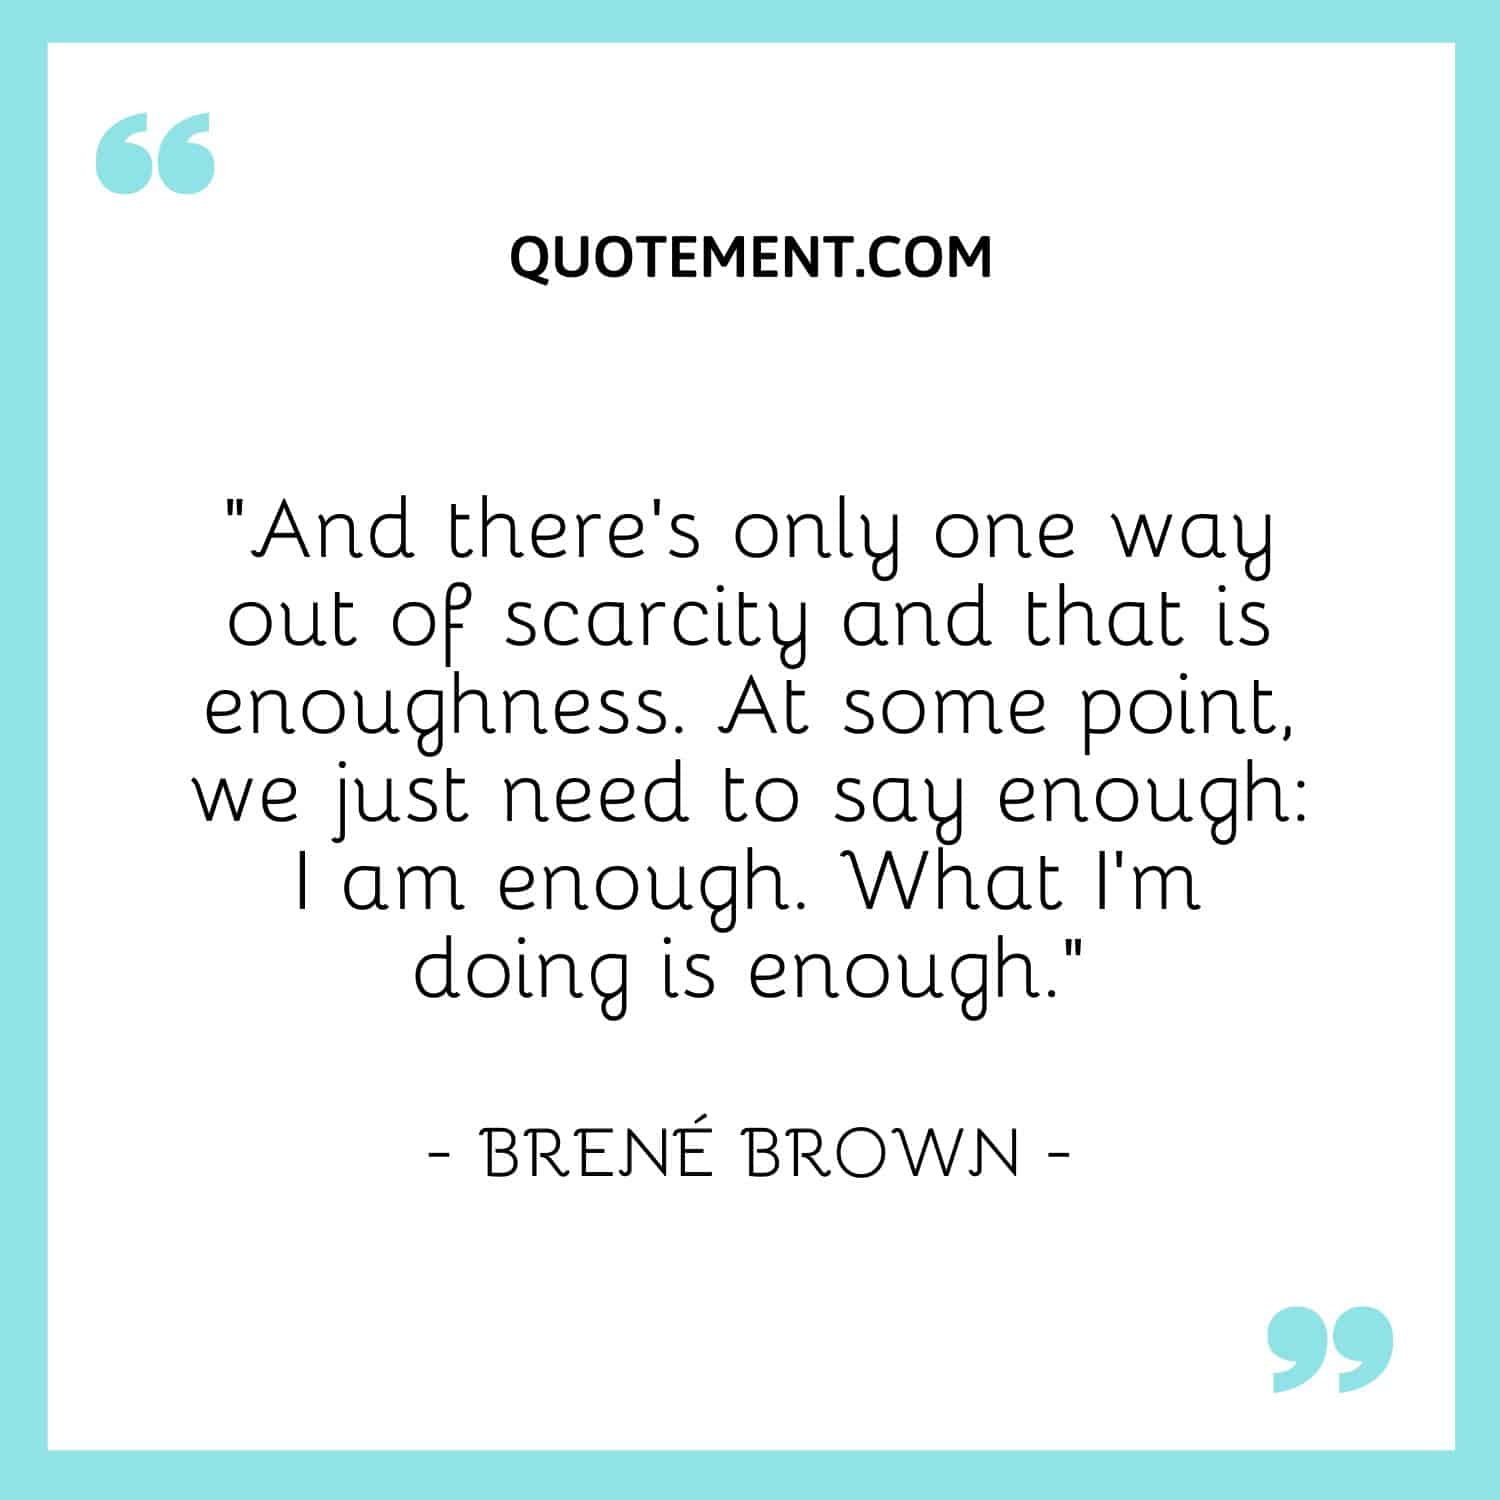 And there's only one way out of scarcity and that is enoughness. At some point, we just need to say enough I am enough.